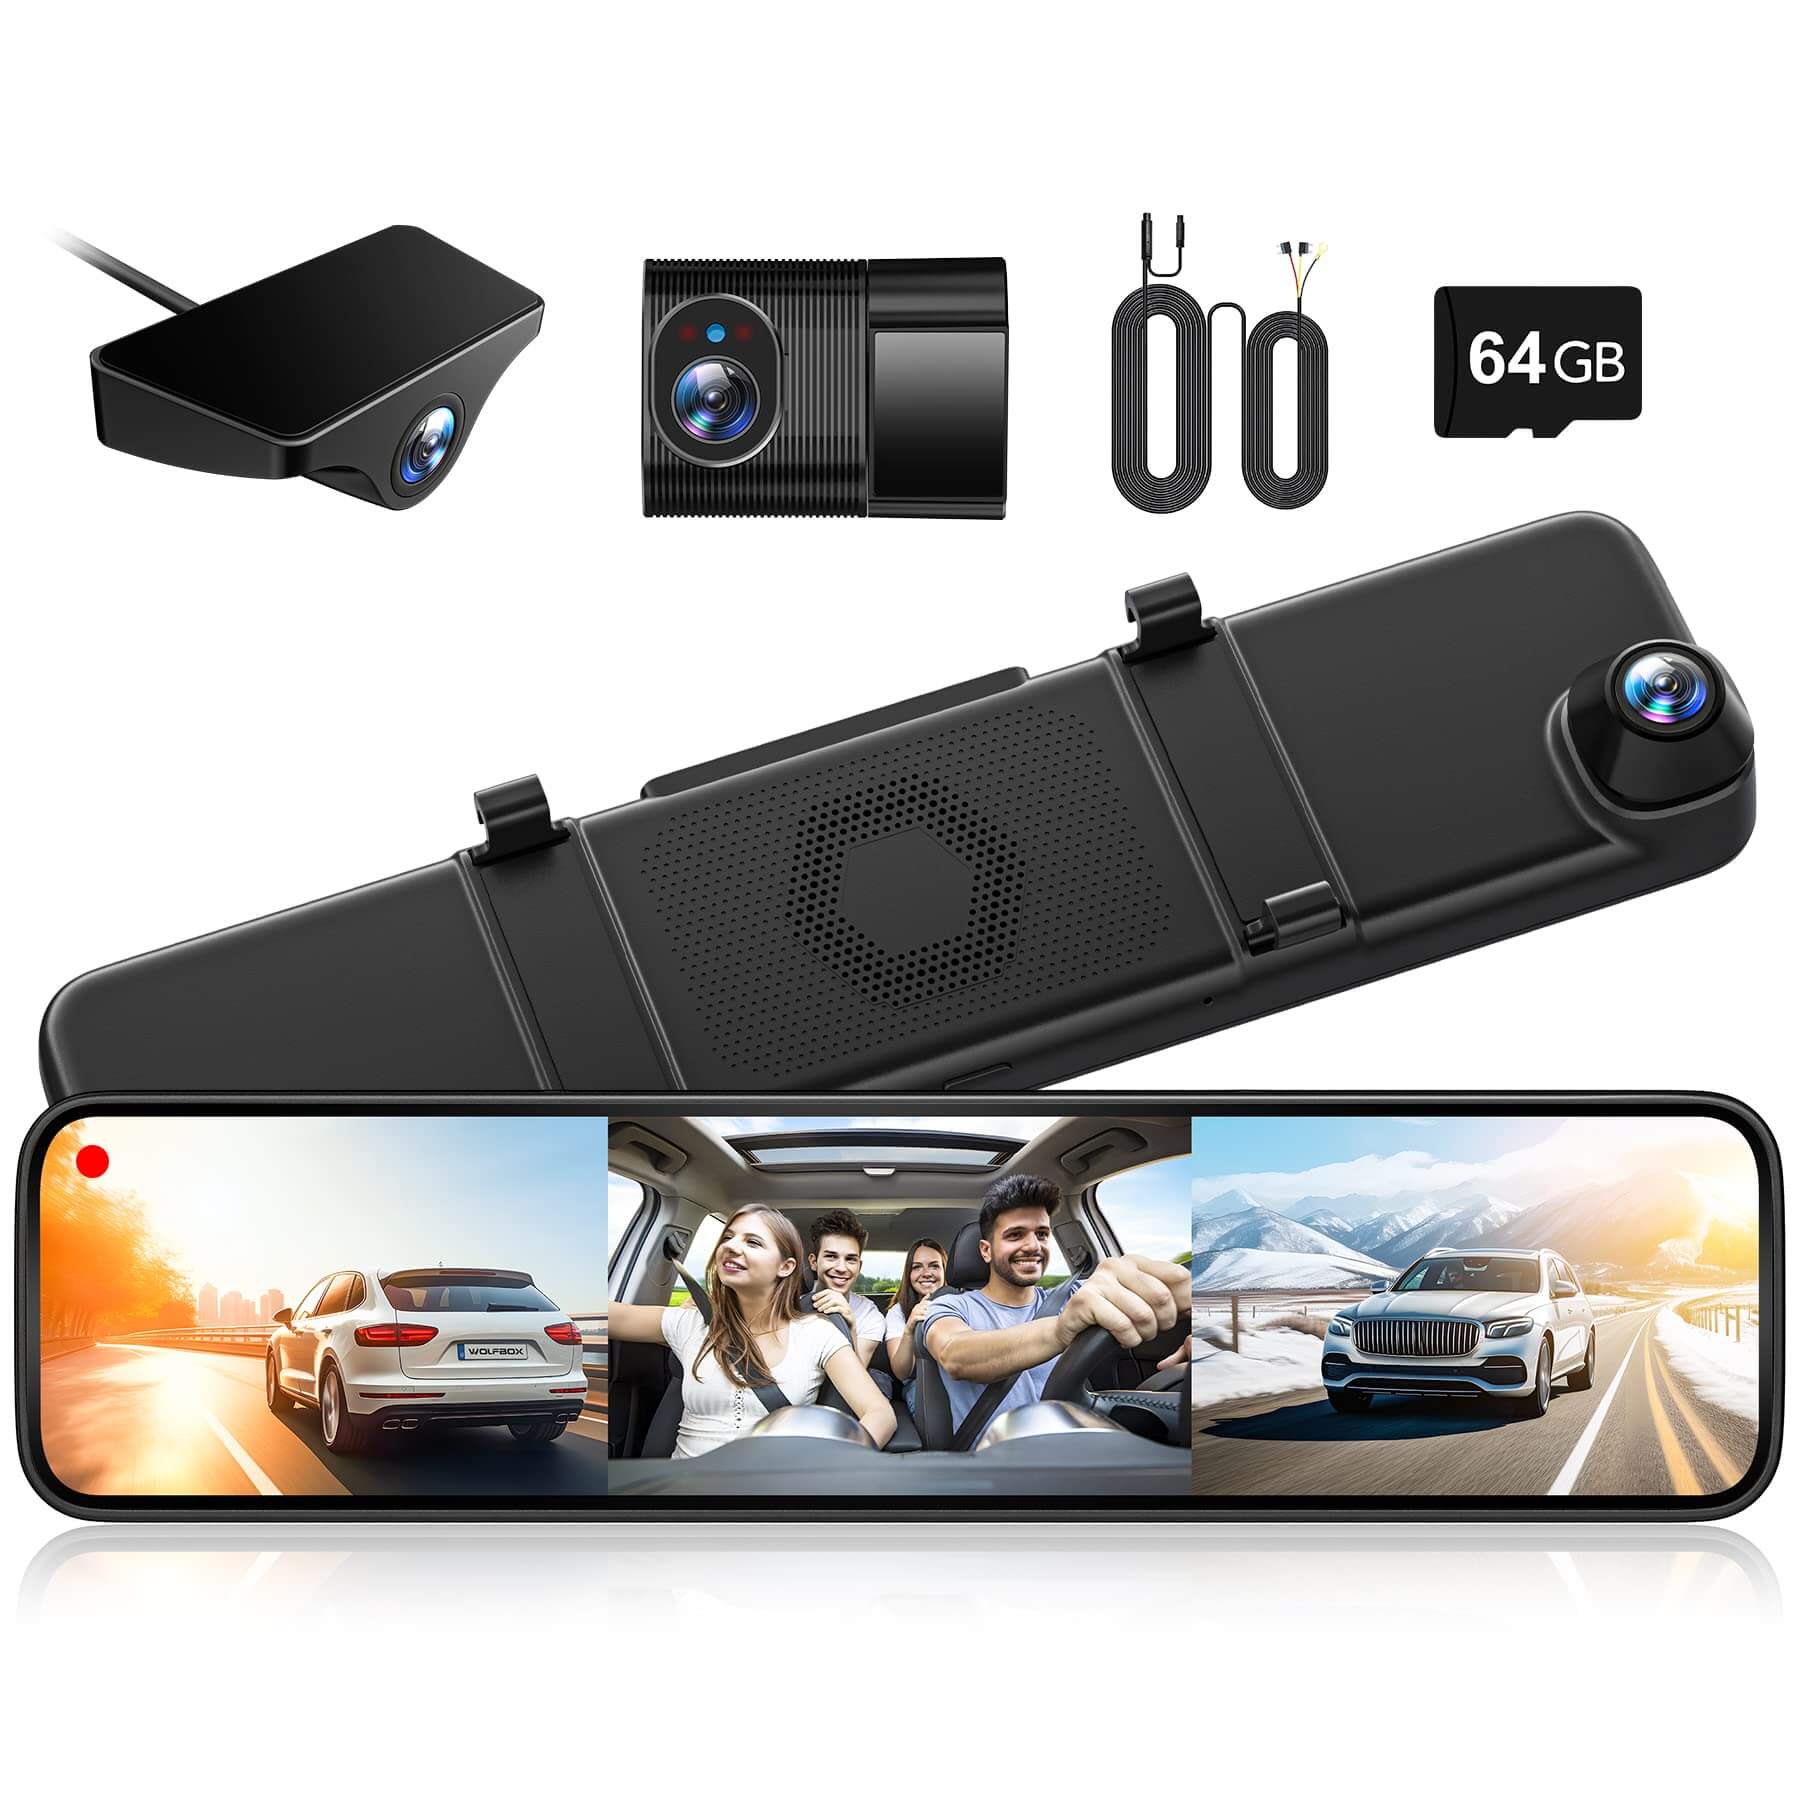 WOLFBOX G890 3 Channel Dash Cam with GPS Smart Mirror camera WOLFBOX   